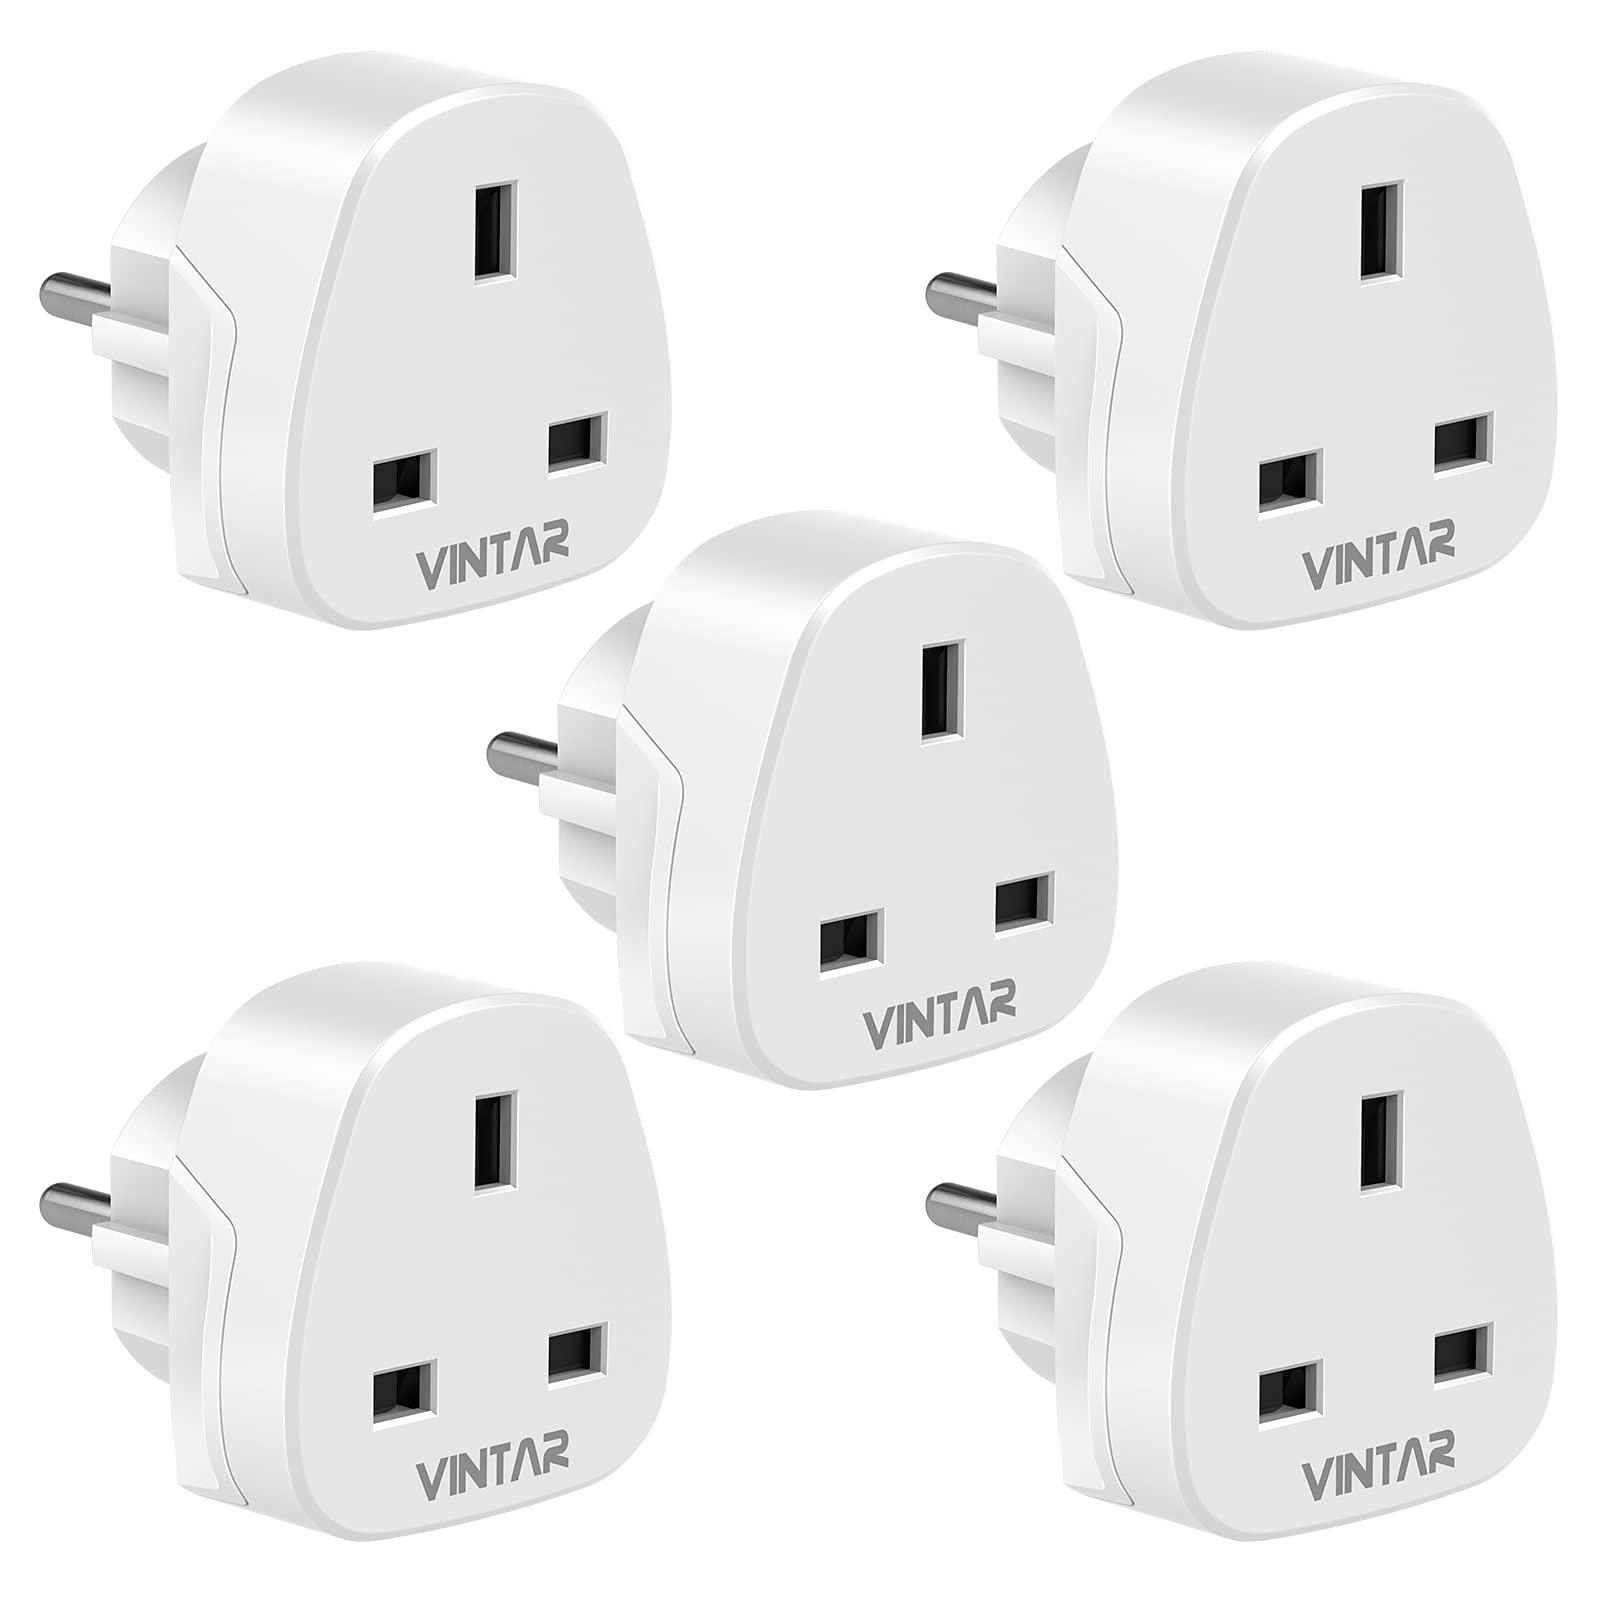 VINTAR UK to European Plug Adapter Round 3 Pin to 2 Pin Type G to Type C,E,F for Spain, France, Netherlands, Greece, Germany and Asia[5-packs]